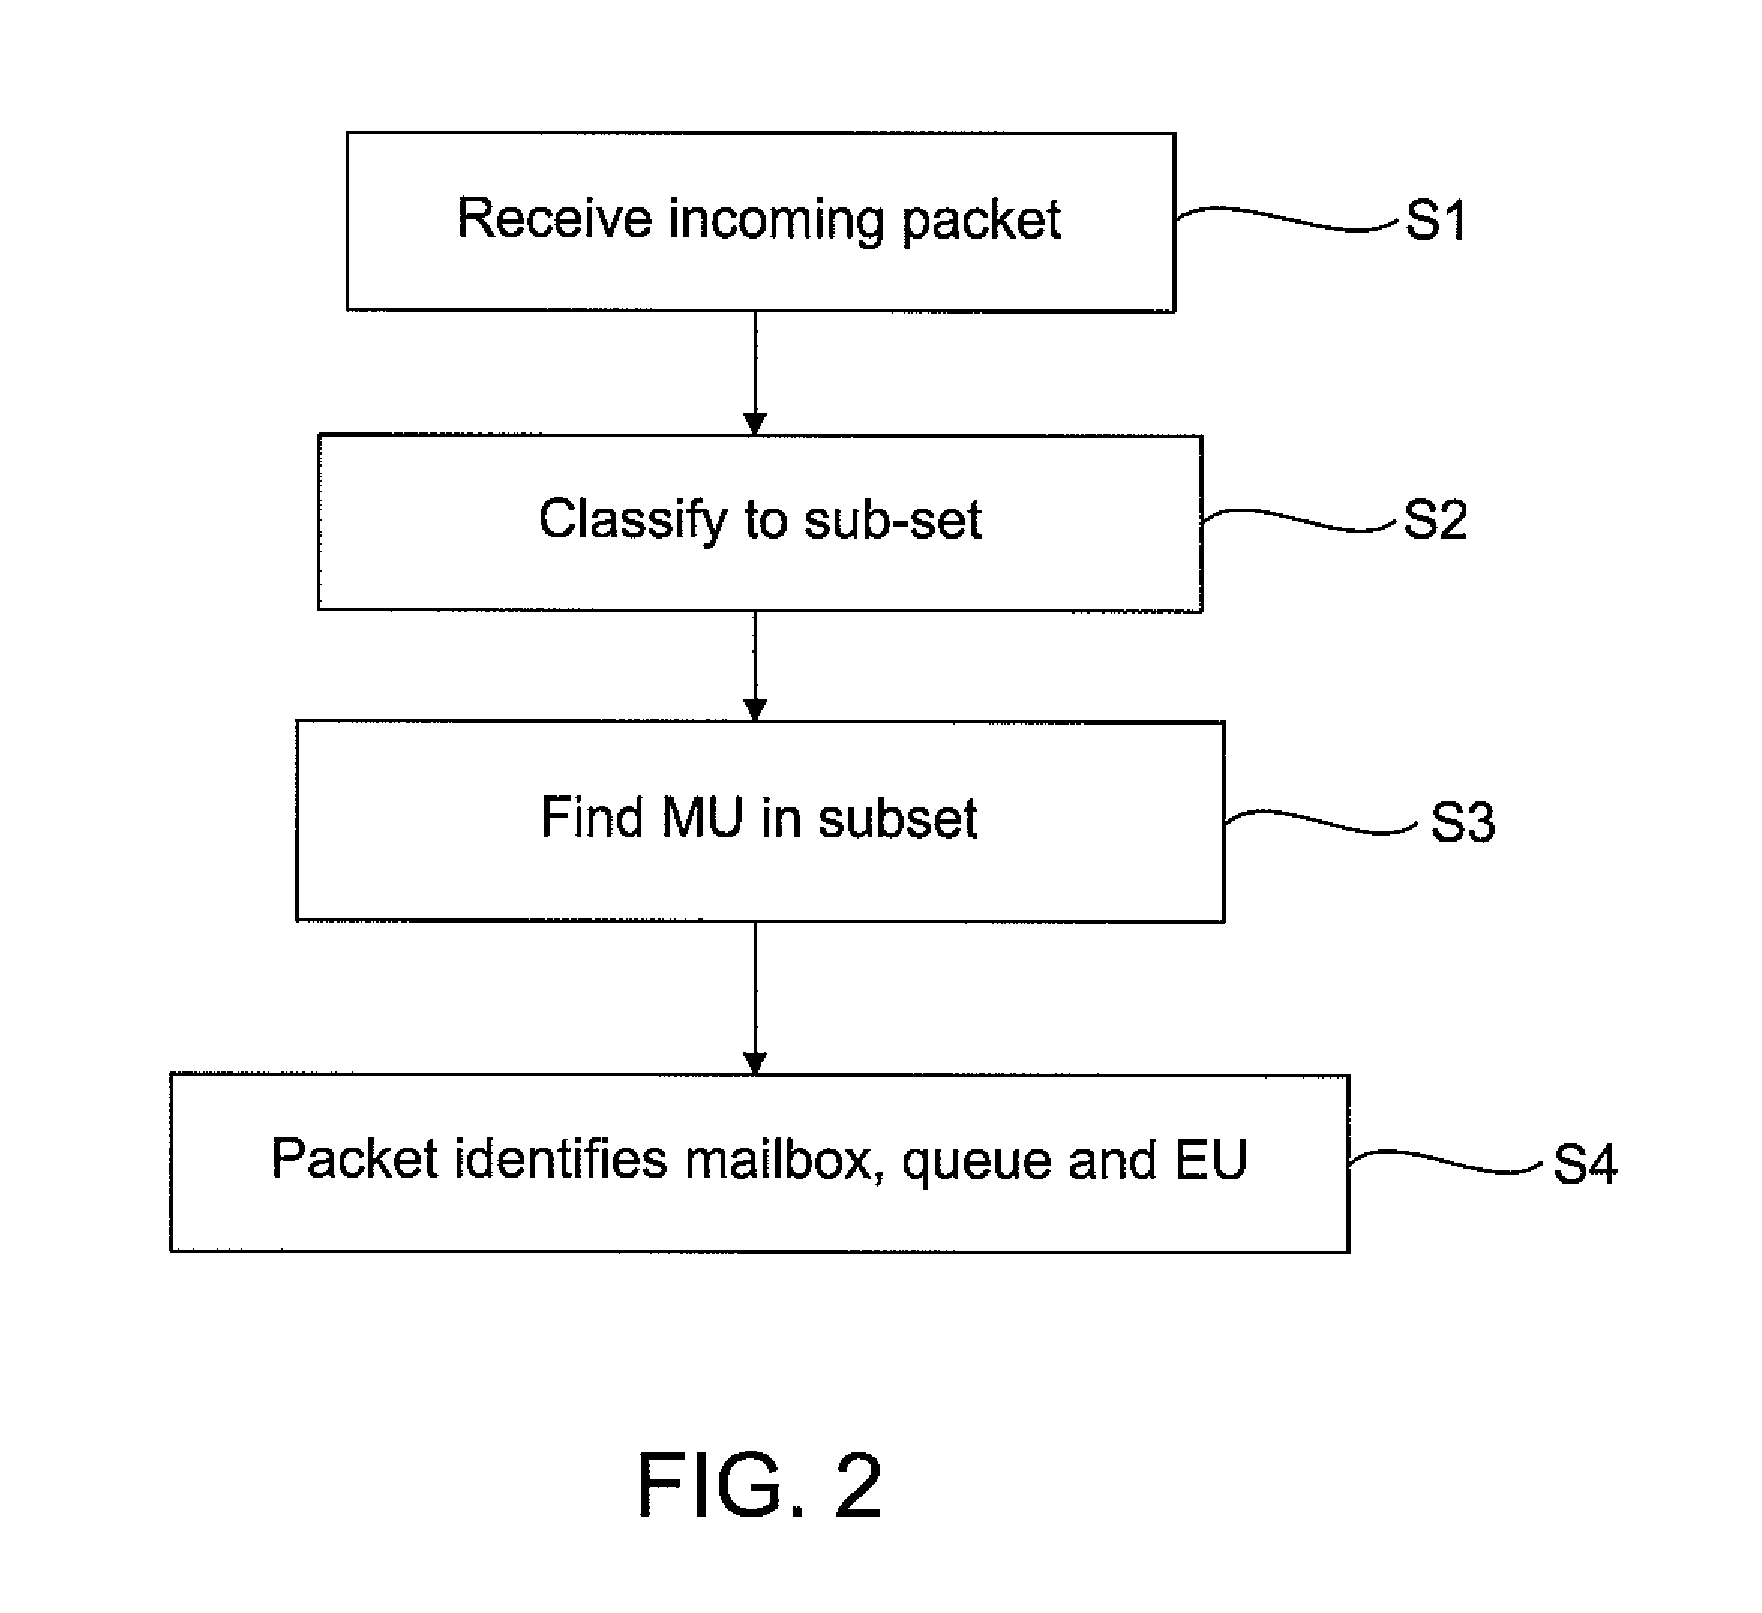 Grid routing apparatus and method